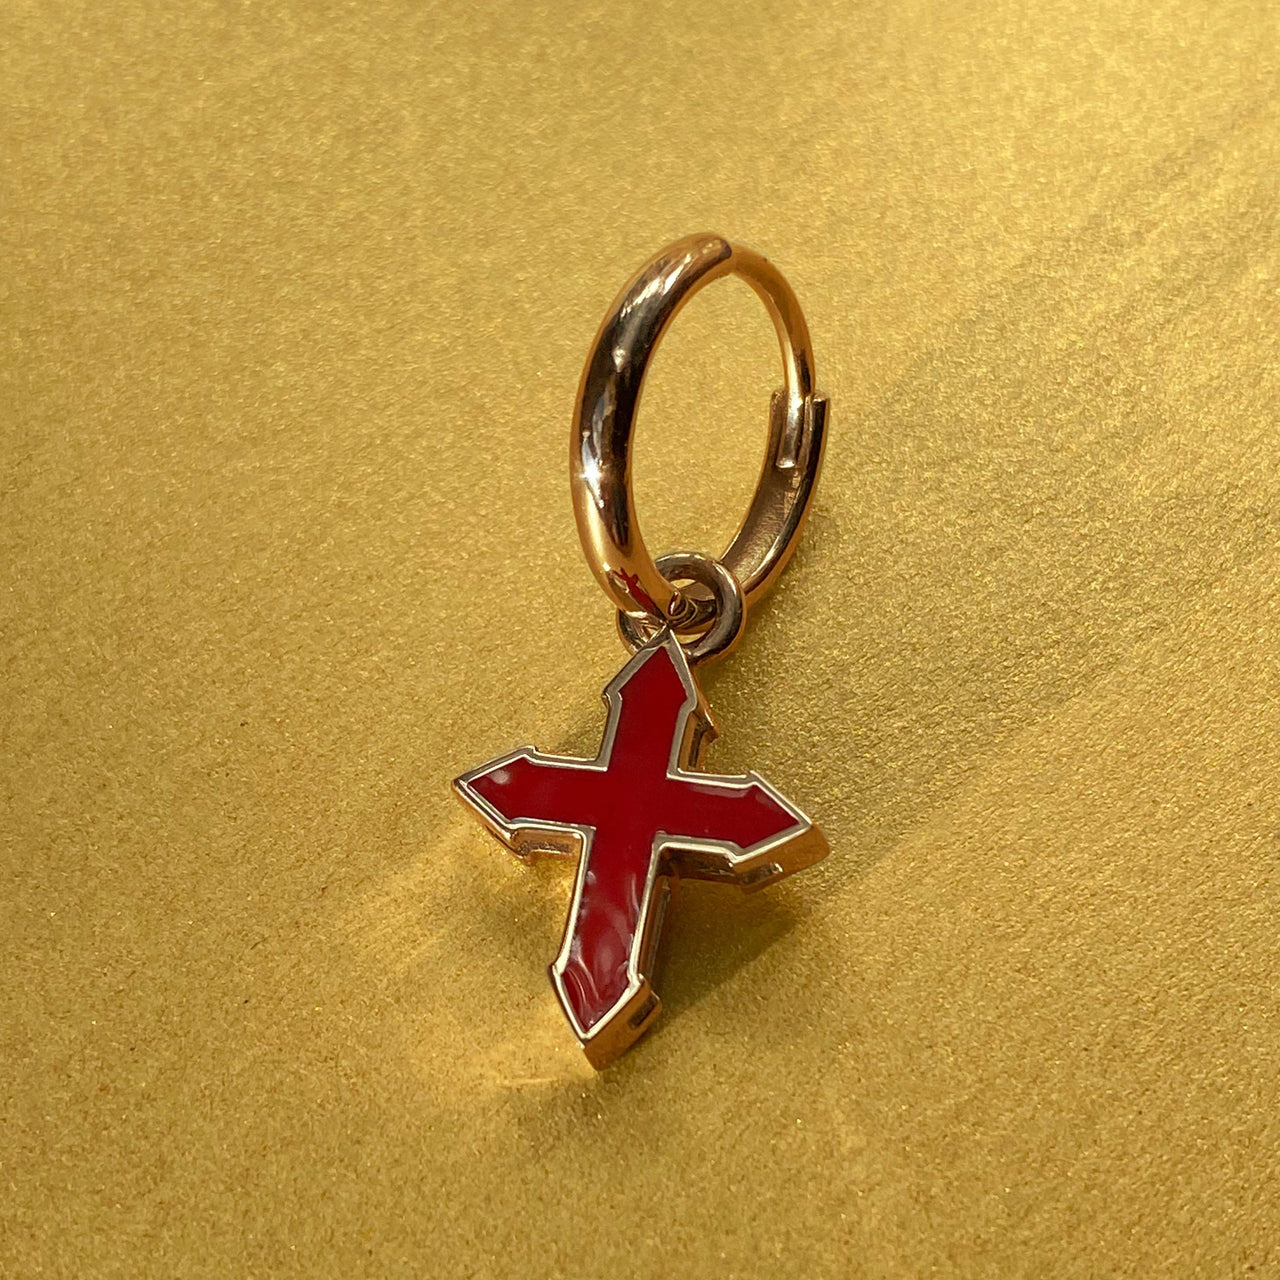 EARRING CROSS "A DROP OF RED" / SOLID GOLD & RED ENAMEL